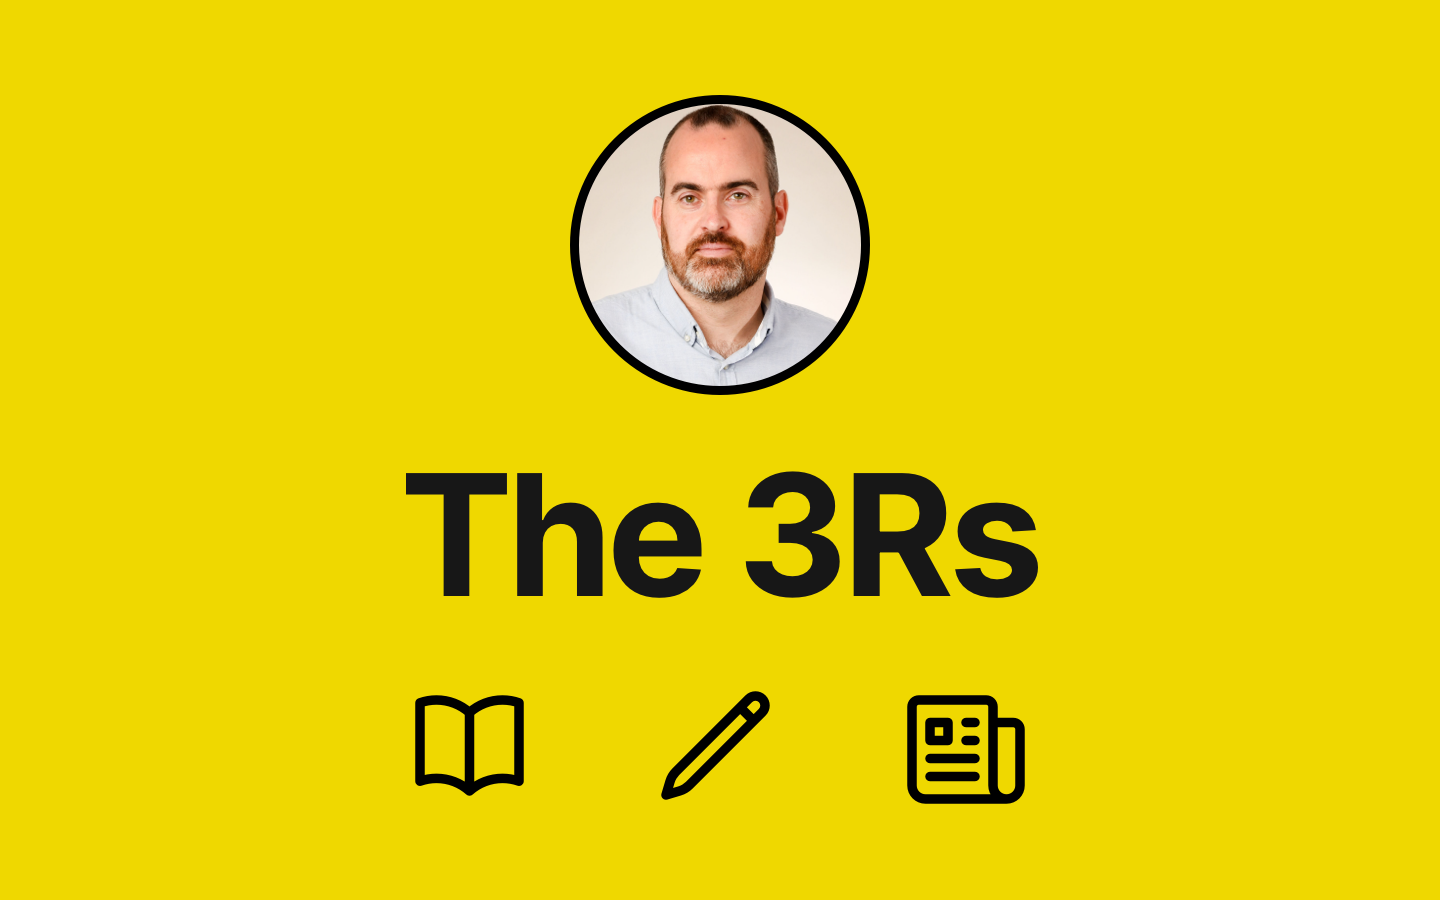 The 3Rs - Reading, writing, and research to be interested in #35 feature image